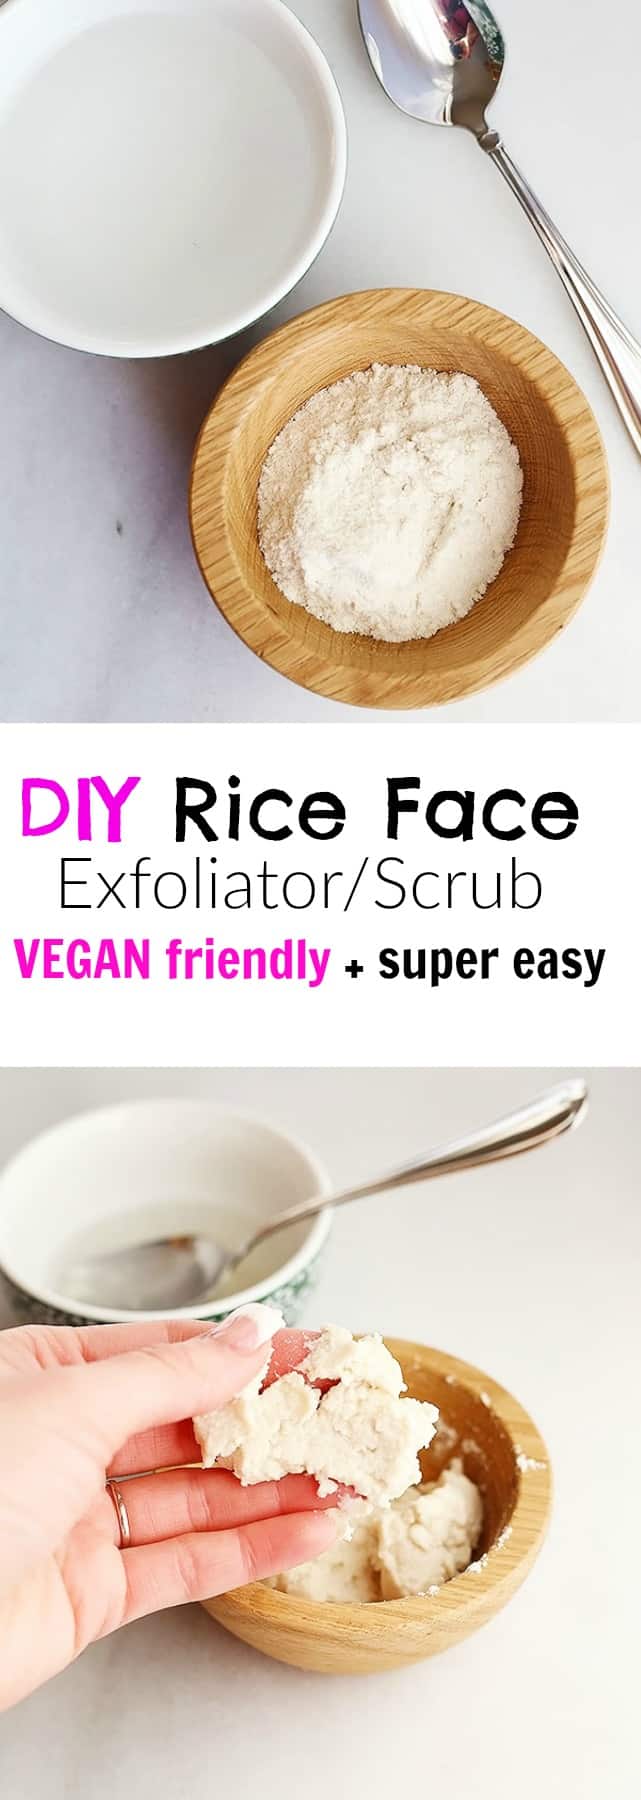 I am showing how to make a super quick and easy DIY Rice Face exfoliate/scrub VEGAN friendly / TwoRaspberries.com